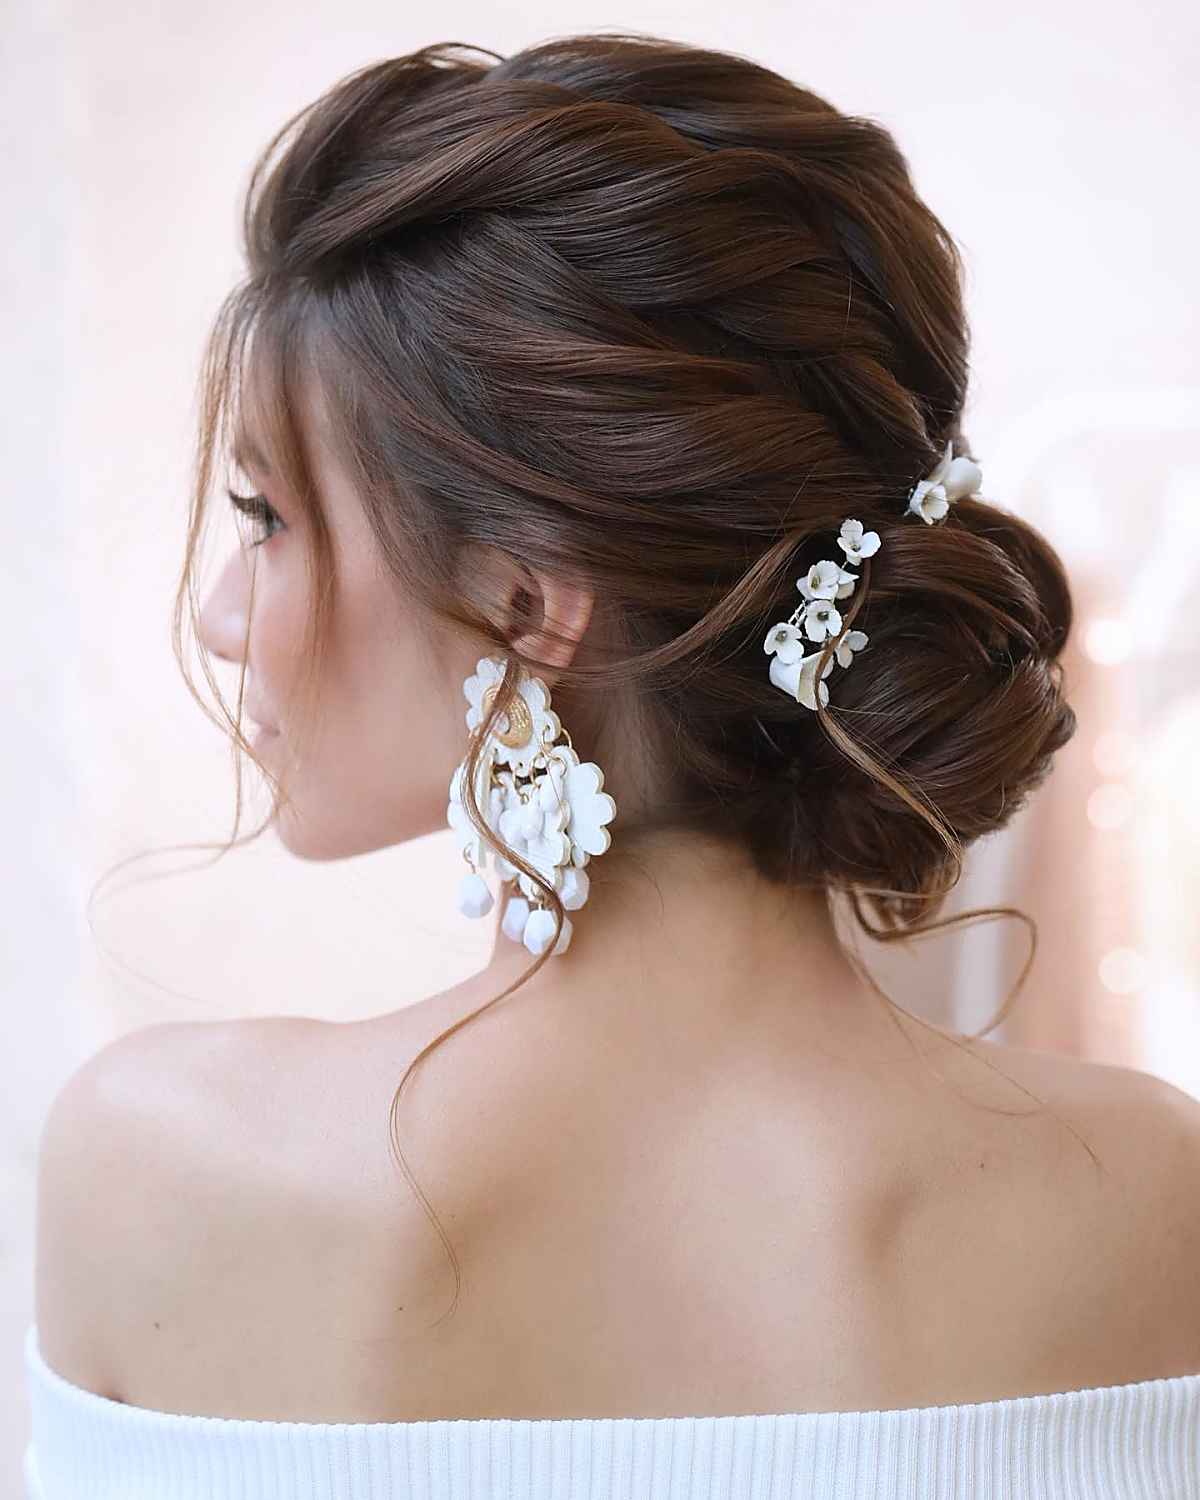 clean, soft and classy wedding updo hairstyle